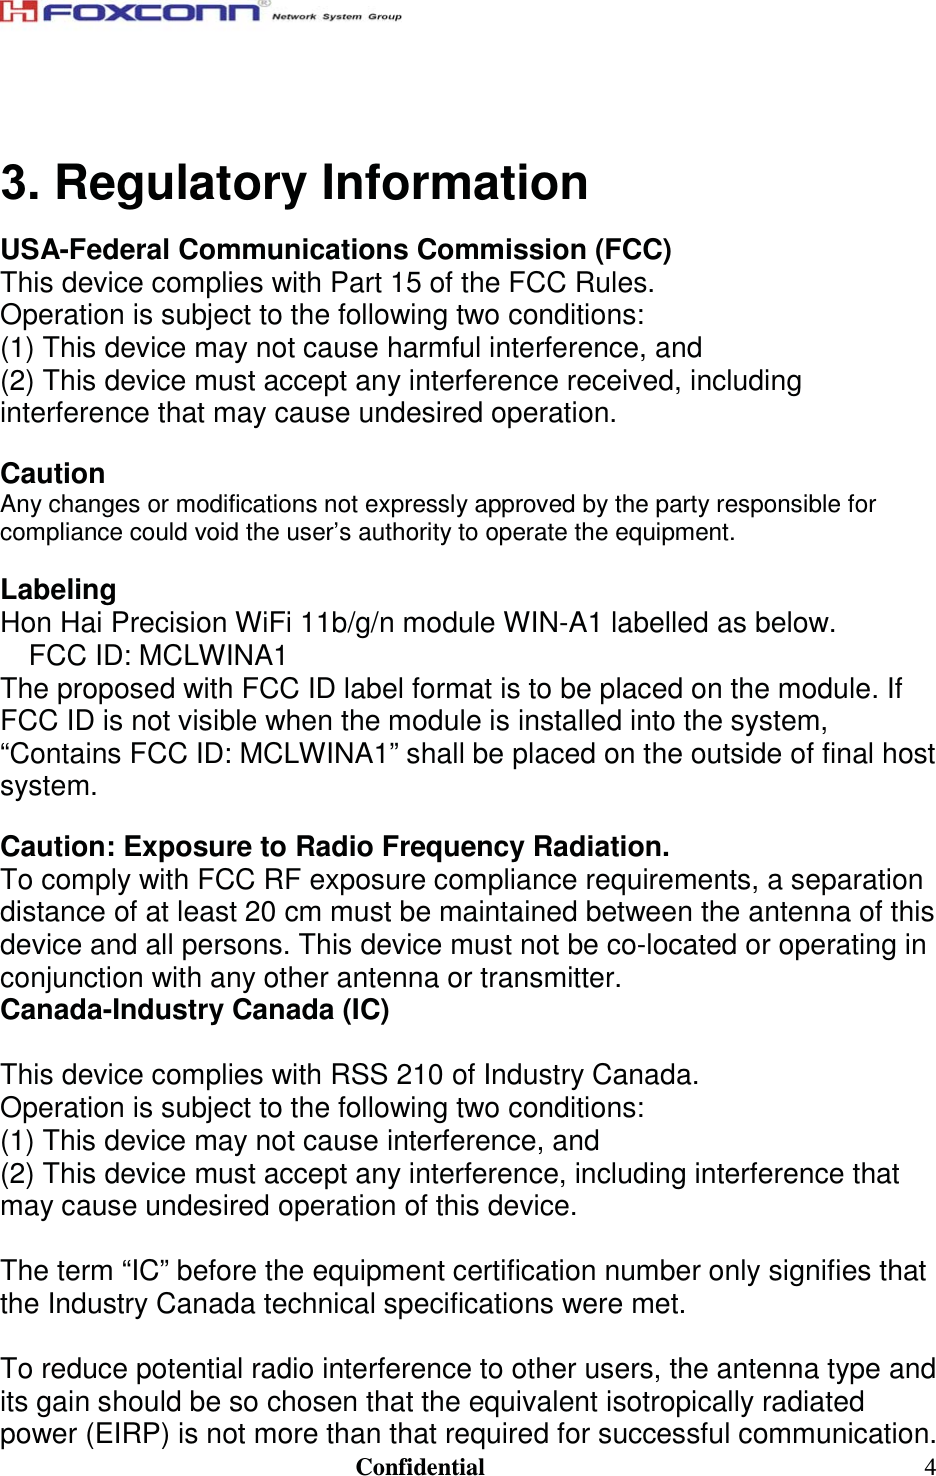                                                                               Confidential  4 3. Regulatory Information USA-Federal Communications Commission (FCC) This device complies with Part 15 of the FCC Rules. Operation is subject to the following two conditions: (1) This device may not cause harmful interference, and (2) This device must accept any interference received, including interference that may cause undesired operation.  Caution Any changes or modifications not expressly approved by the party responsible for compliance could void the user’s authority to operate the equipment.  Labeling Hon Hai Precision WiFi 11b/g/n module WIN-A1 labelled as below. FCC ID: MCLWINA1 The proposed with FCC ID label format is to be placed on the module. If FCC ID is not visible when the module is installed into the system, “Contains FCC ID: MCLWINA1” shall be placed on the outside of final host system.   Caution: Exposure to Radio Frequency Radiation. To comply with FCC RF exposure compliance requirements, a separation distance of at least 20 cm must be maintained between the antenna of this device and all persons. This device must not be co-located or operating in conjunction with any other antenna or transmitter.  Canada-Industry Canada (IC)  This device complies with RSS 210 of Industry Canada. Operation is subject to the following two conditions: (1) This device may not cause interference, and (2) This device must accept any interference, including interference that may cause undesired operation of this device.  The term “IC” before the equipment certification number only signifies that the Industry Canada technical specifications were met.  To reduce potential radio interference to other users, the antenna type and its gain should be so chosen that the equivalent isotropically radiated power (EIRP) is not more than that required for successful communication. 